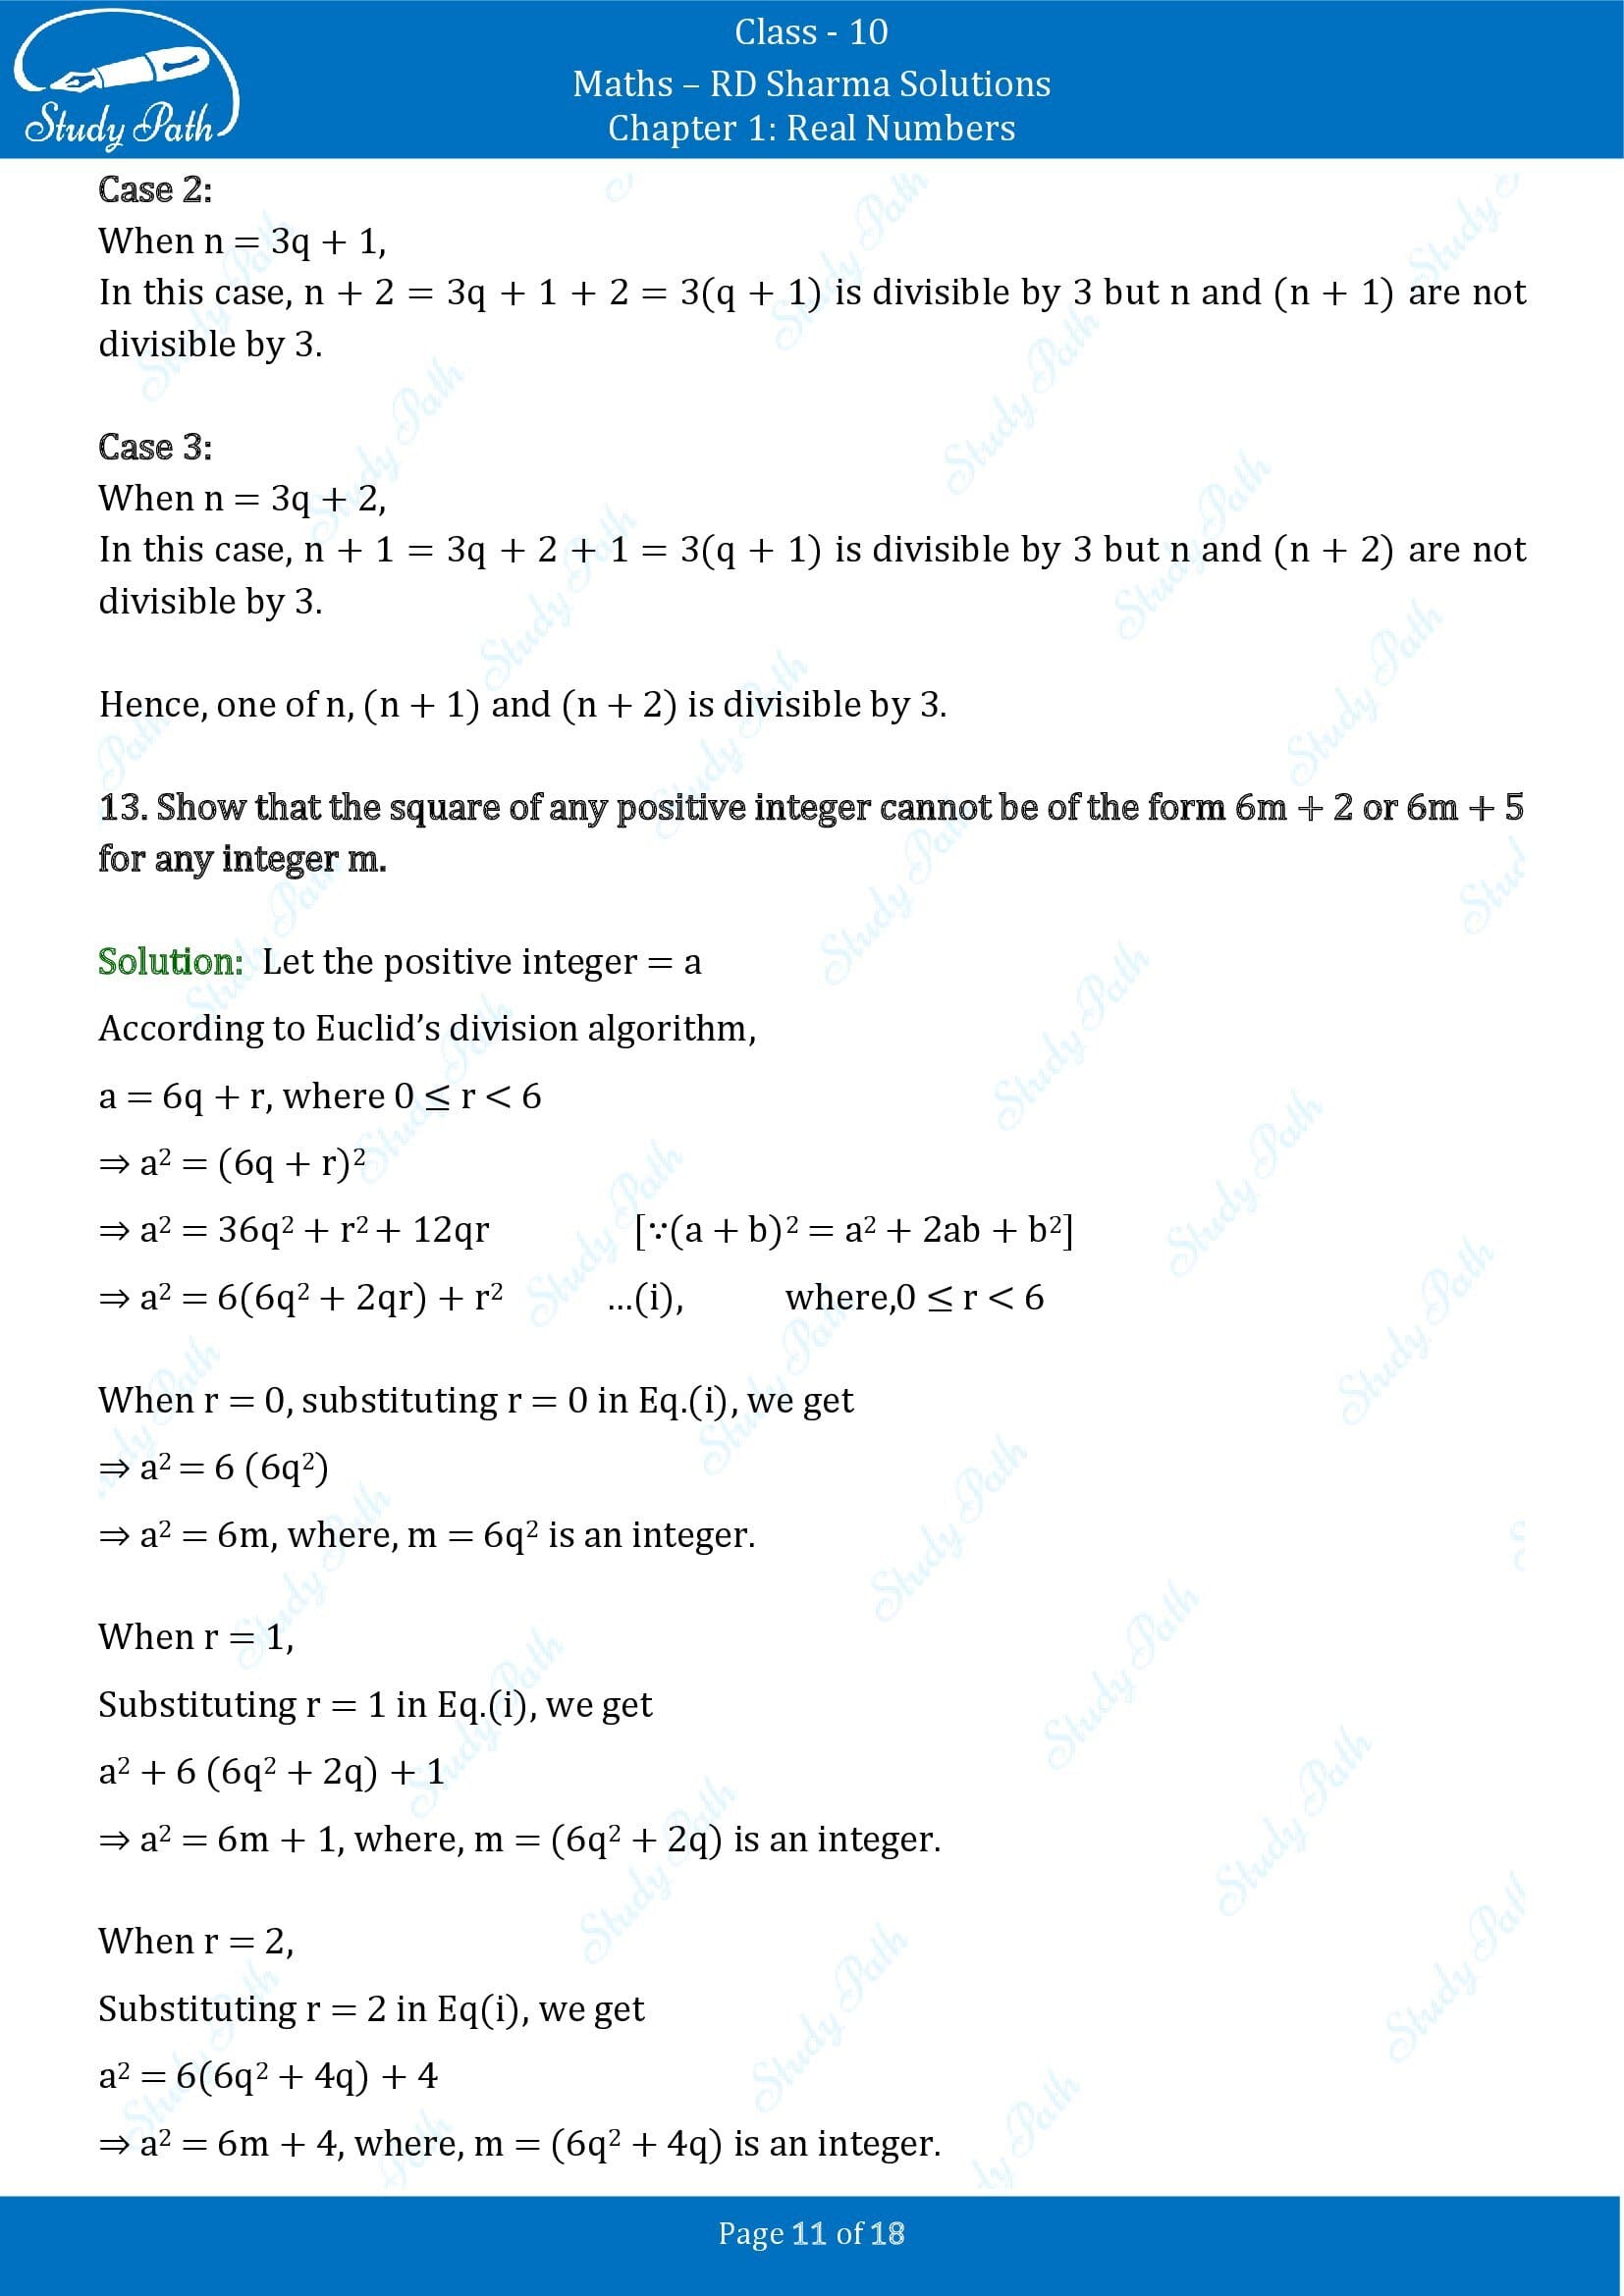 RD Sharma Solutions Class 10 Chapter 1 Real Numbers Exercise 1.1 00011